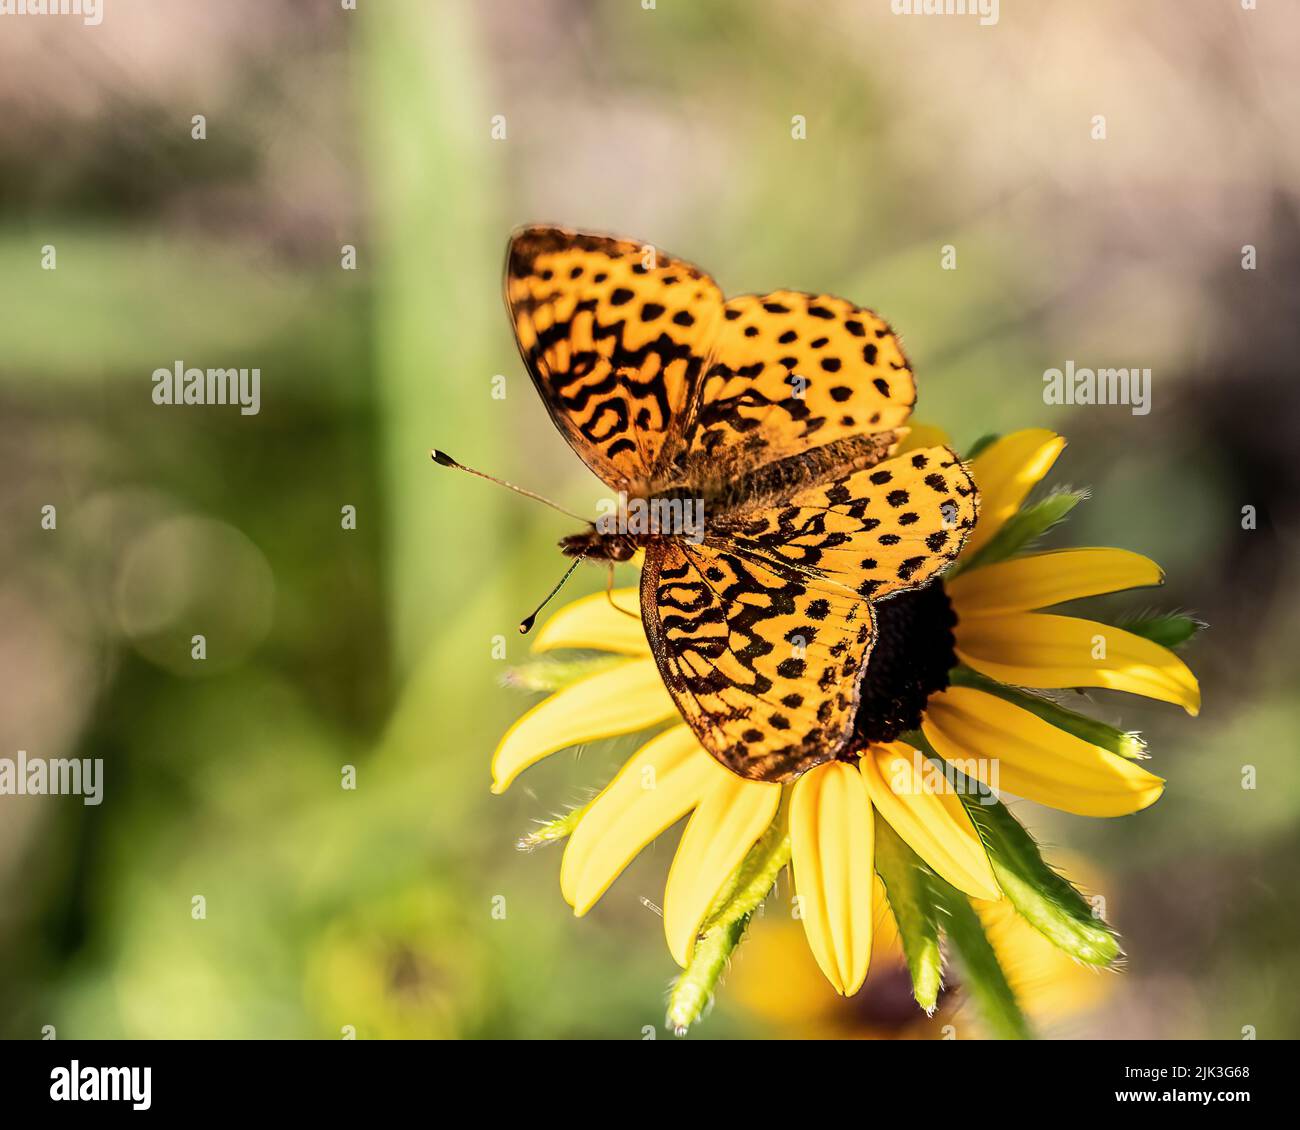 Meadow fritillary butterfly on a rudbeckia, aka black-eyed susan wildflower at St. Croix State Park, Hinckley, Minnesota USA. Stock Photo